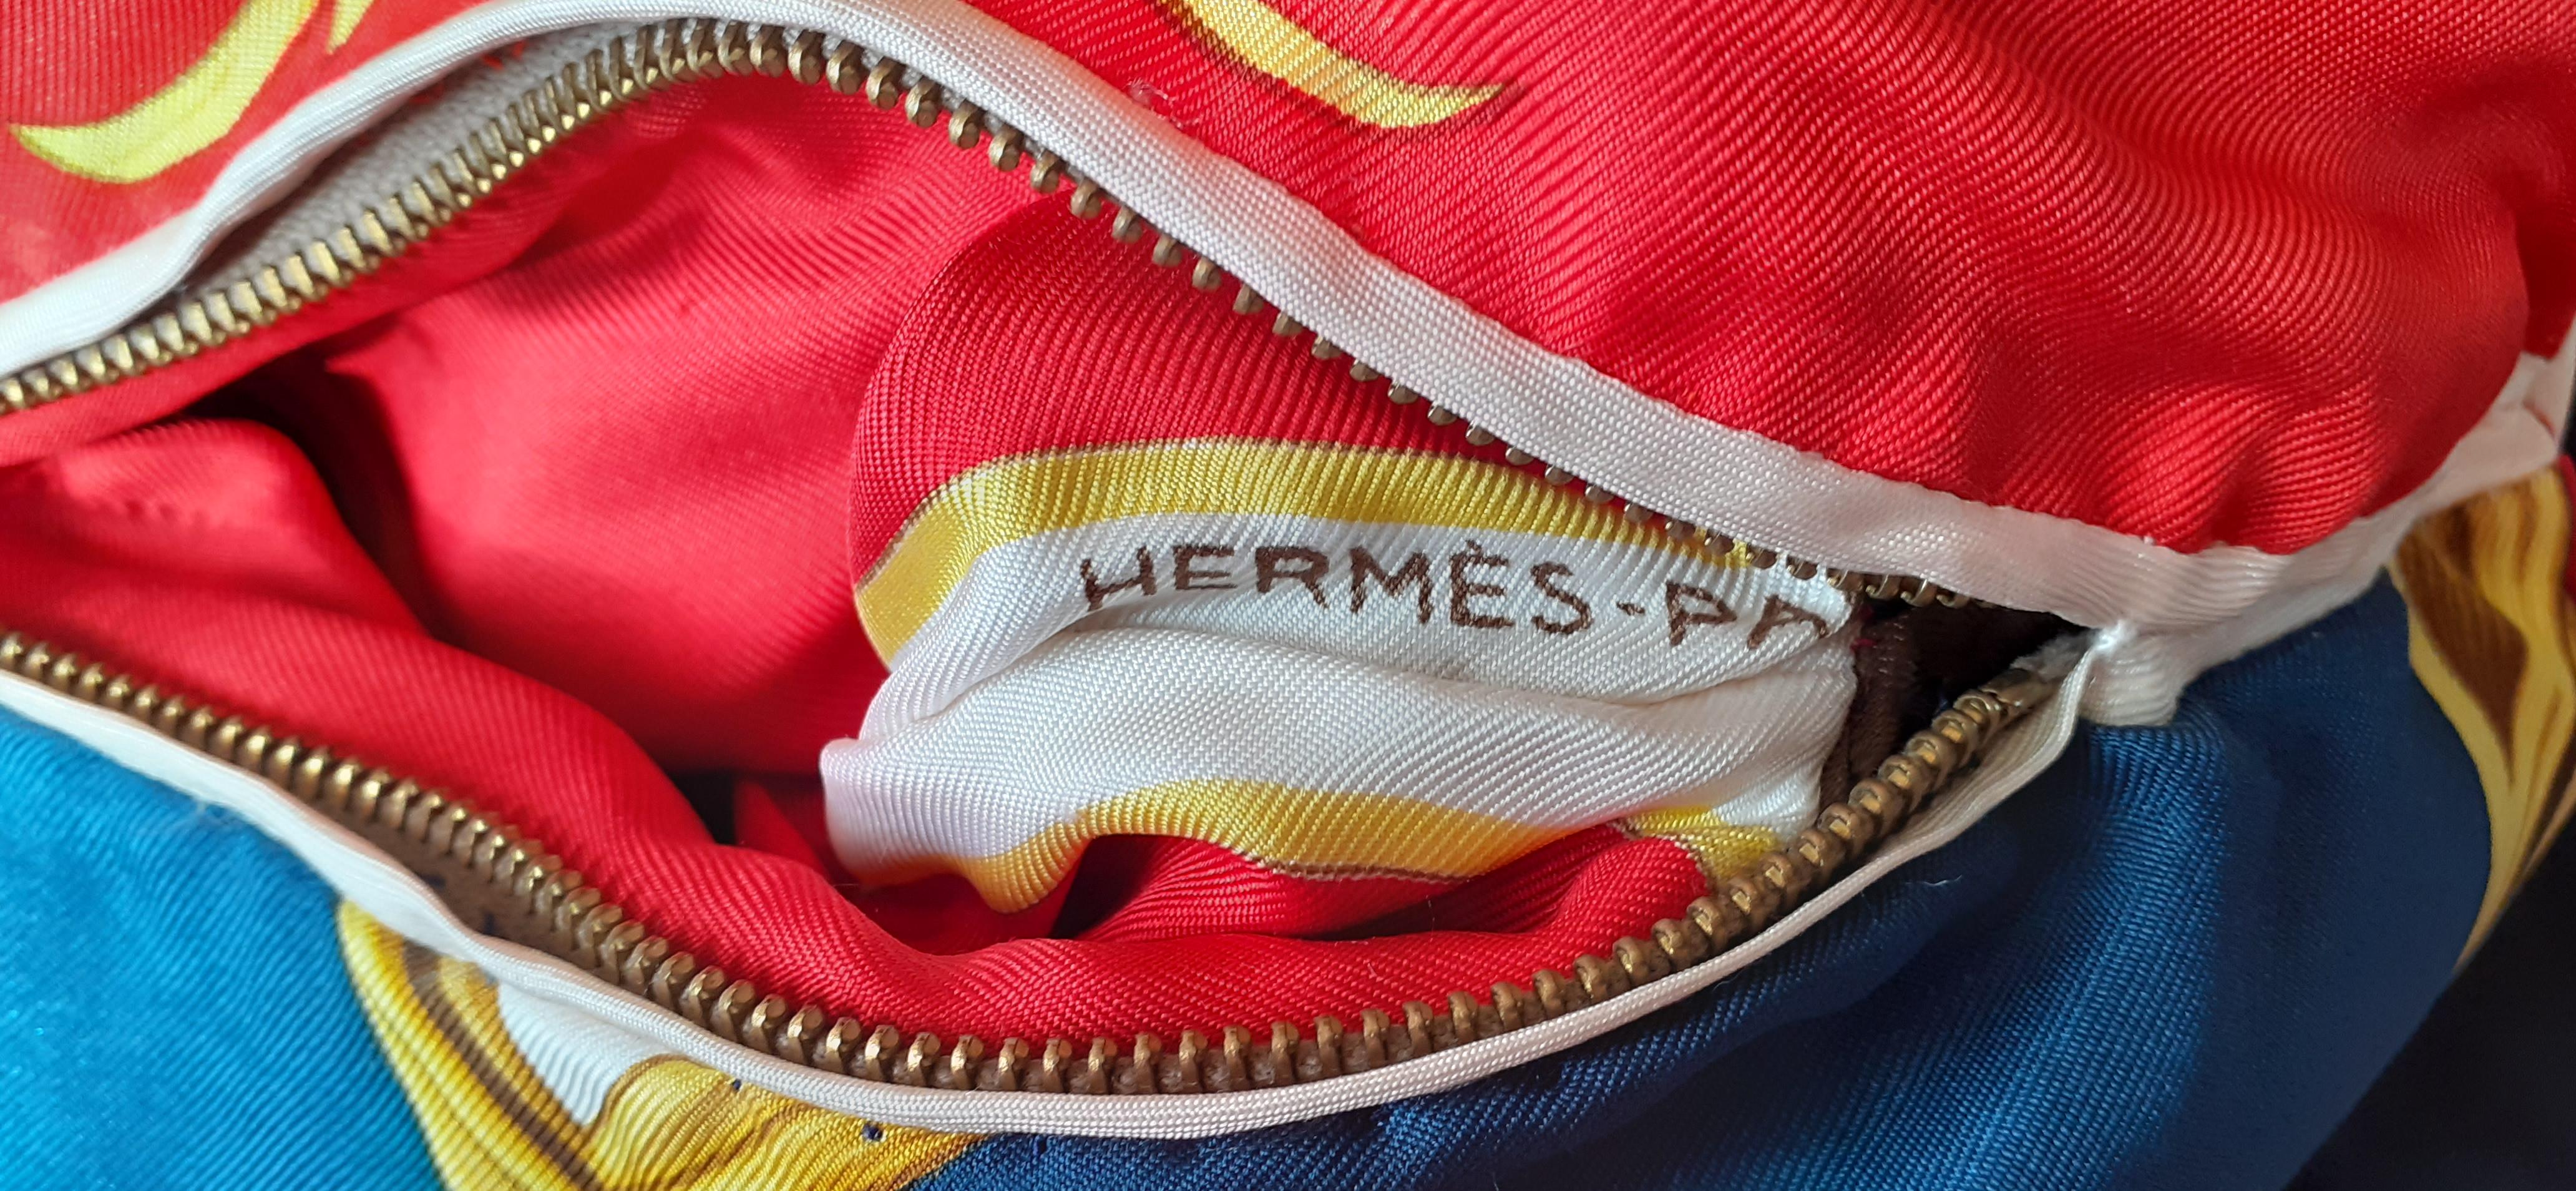 Exceptional Hermès Glamour Vintage Muff in Silk Crowns Couronnes Print Abadie For Sale 8